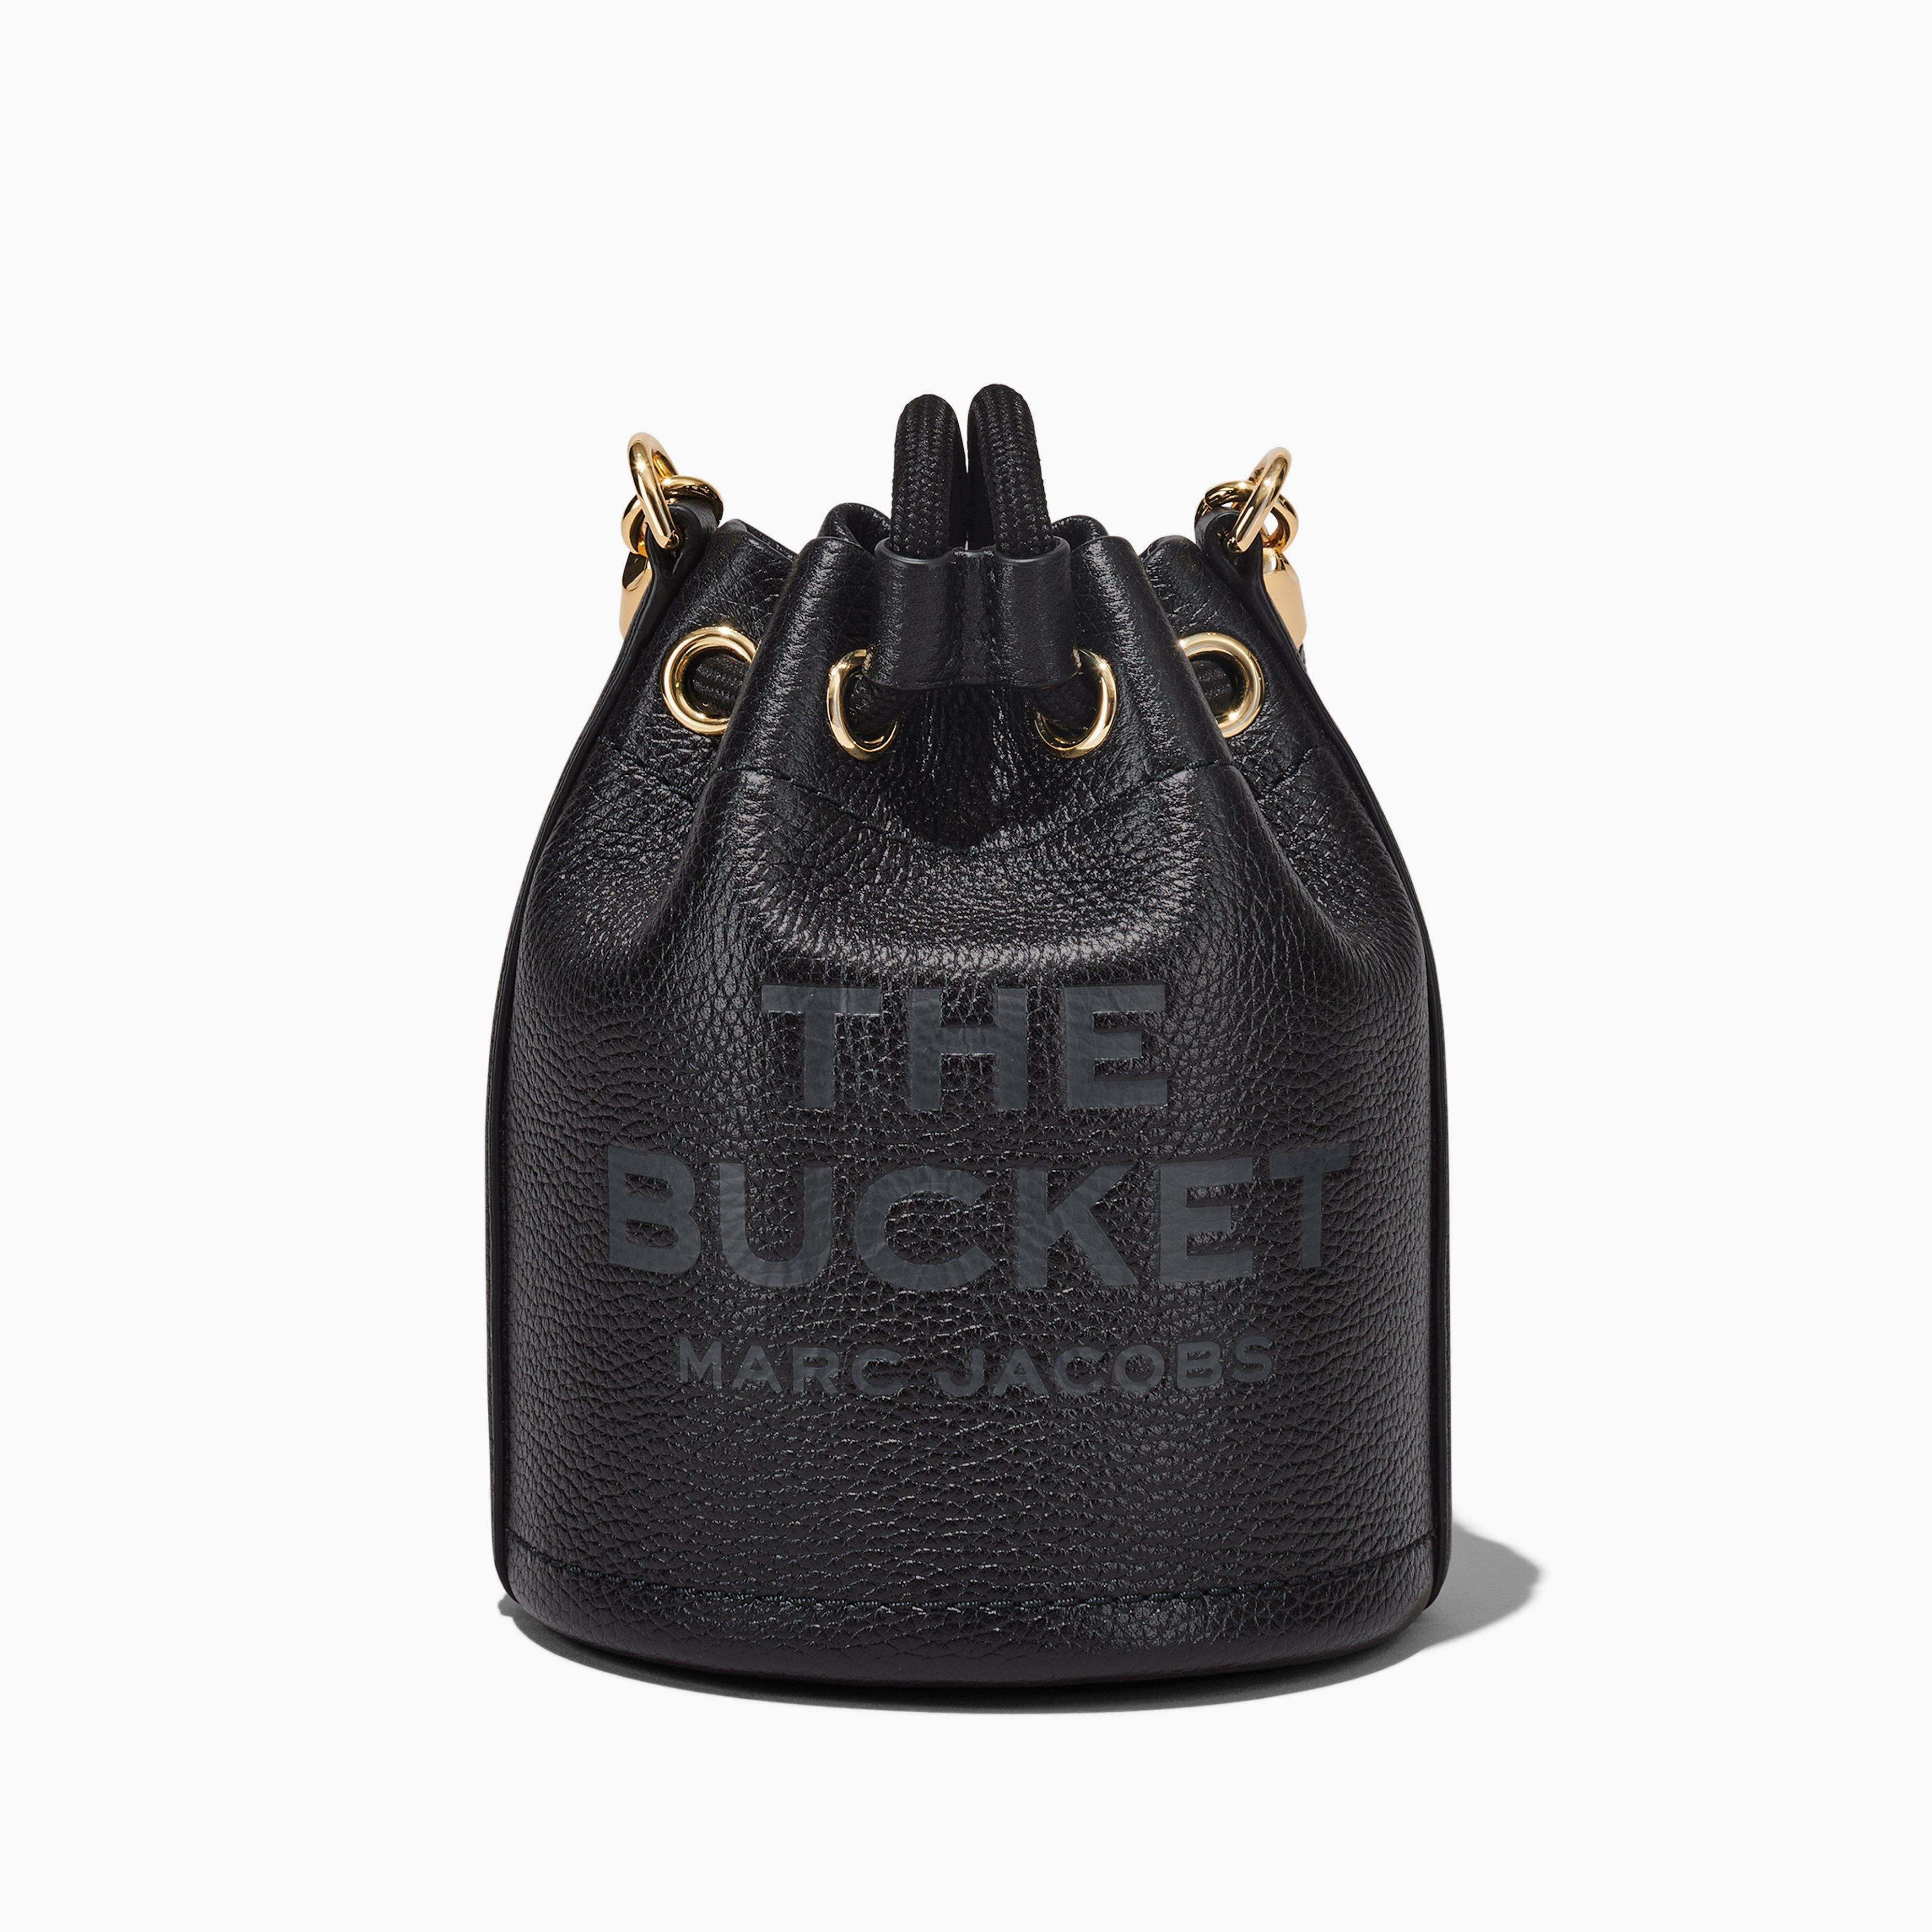 THE LEATHER MICRO BUCKET BAG - 6